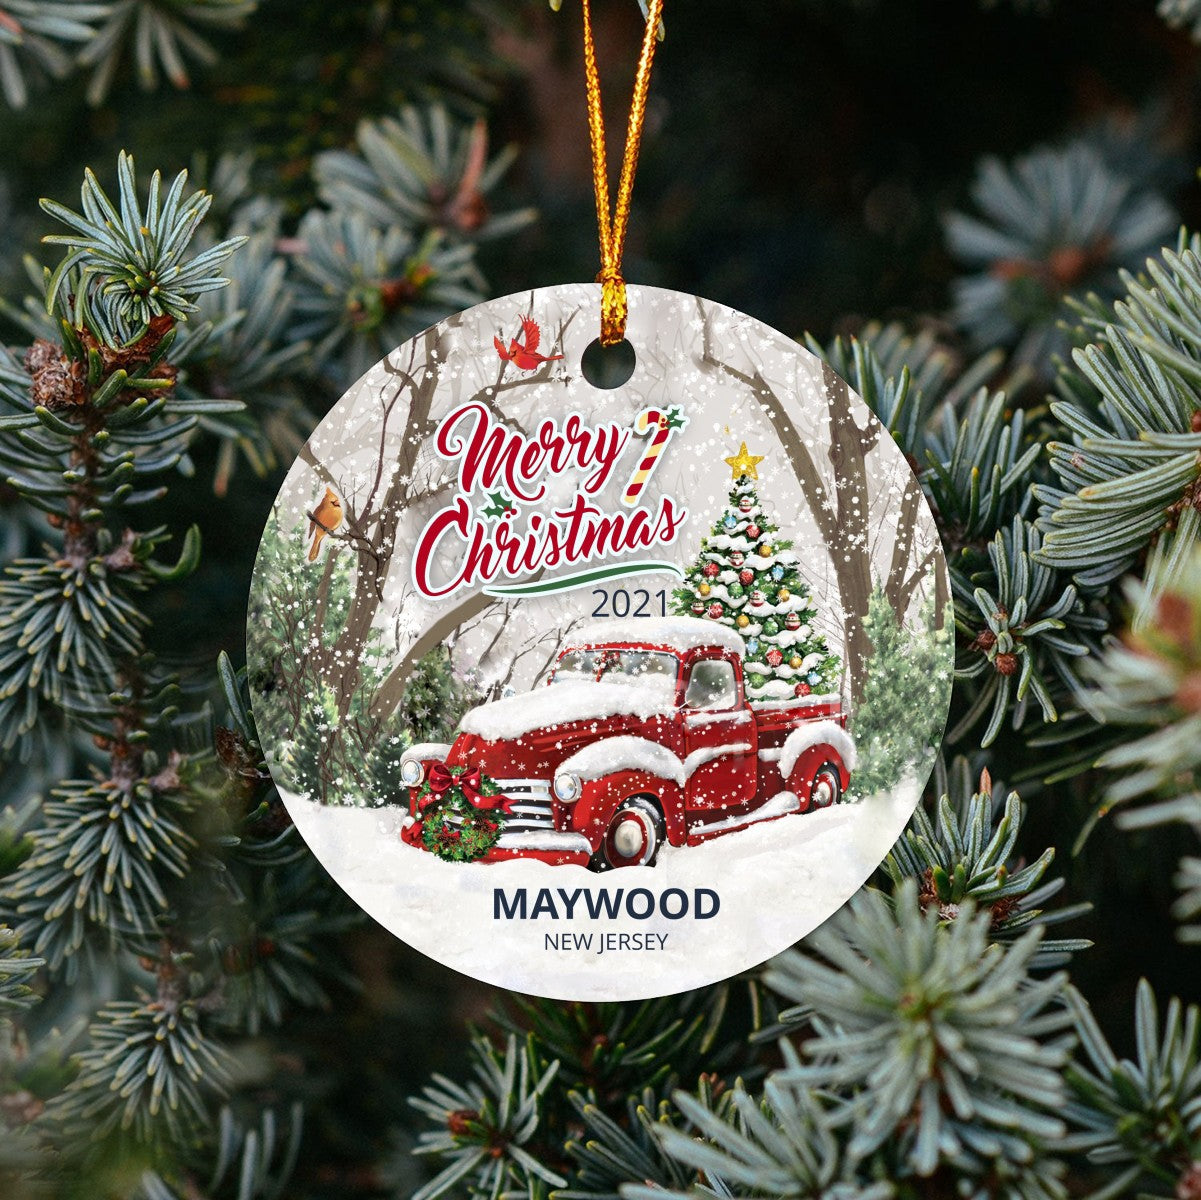 Christmas Tree Ornaments Maywood - Ornament With Name City, State Maywood New Jersey NJ Ornament - Red Truck Xmas Ornaments 3'' Plastic Gift For Family, Friend And Housewarming